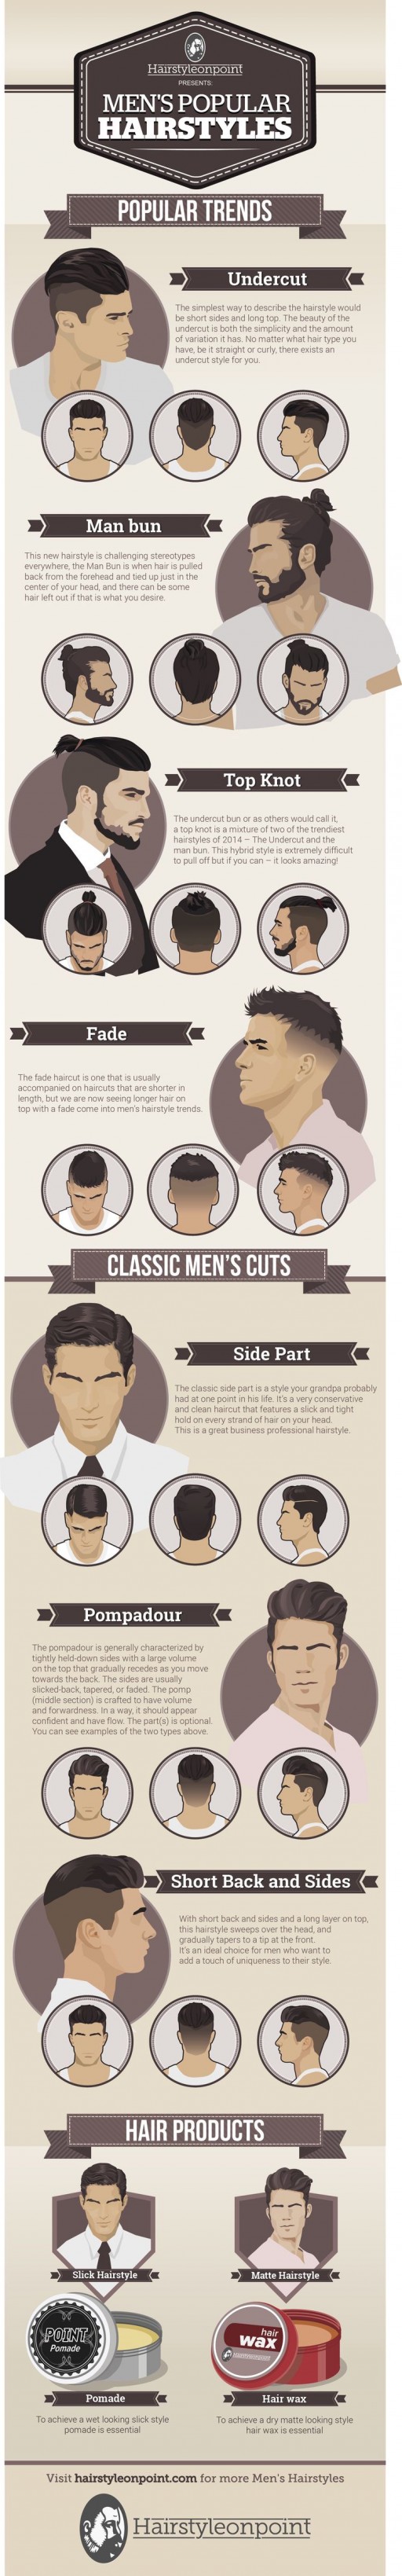 men's hairstyles groom the beauty department